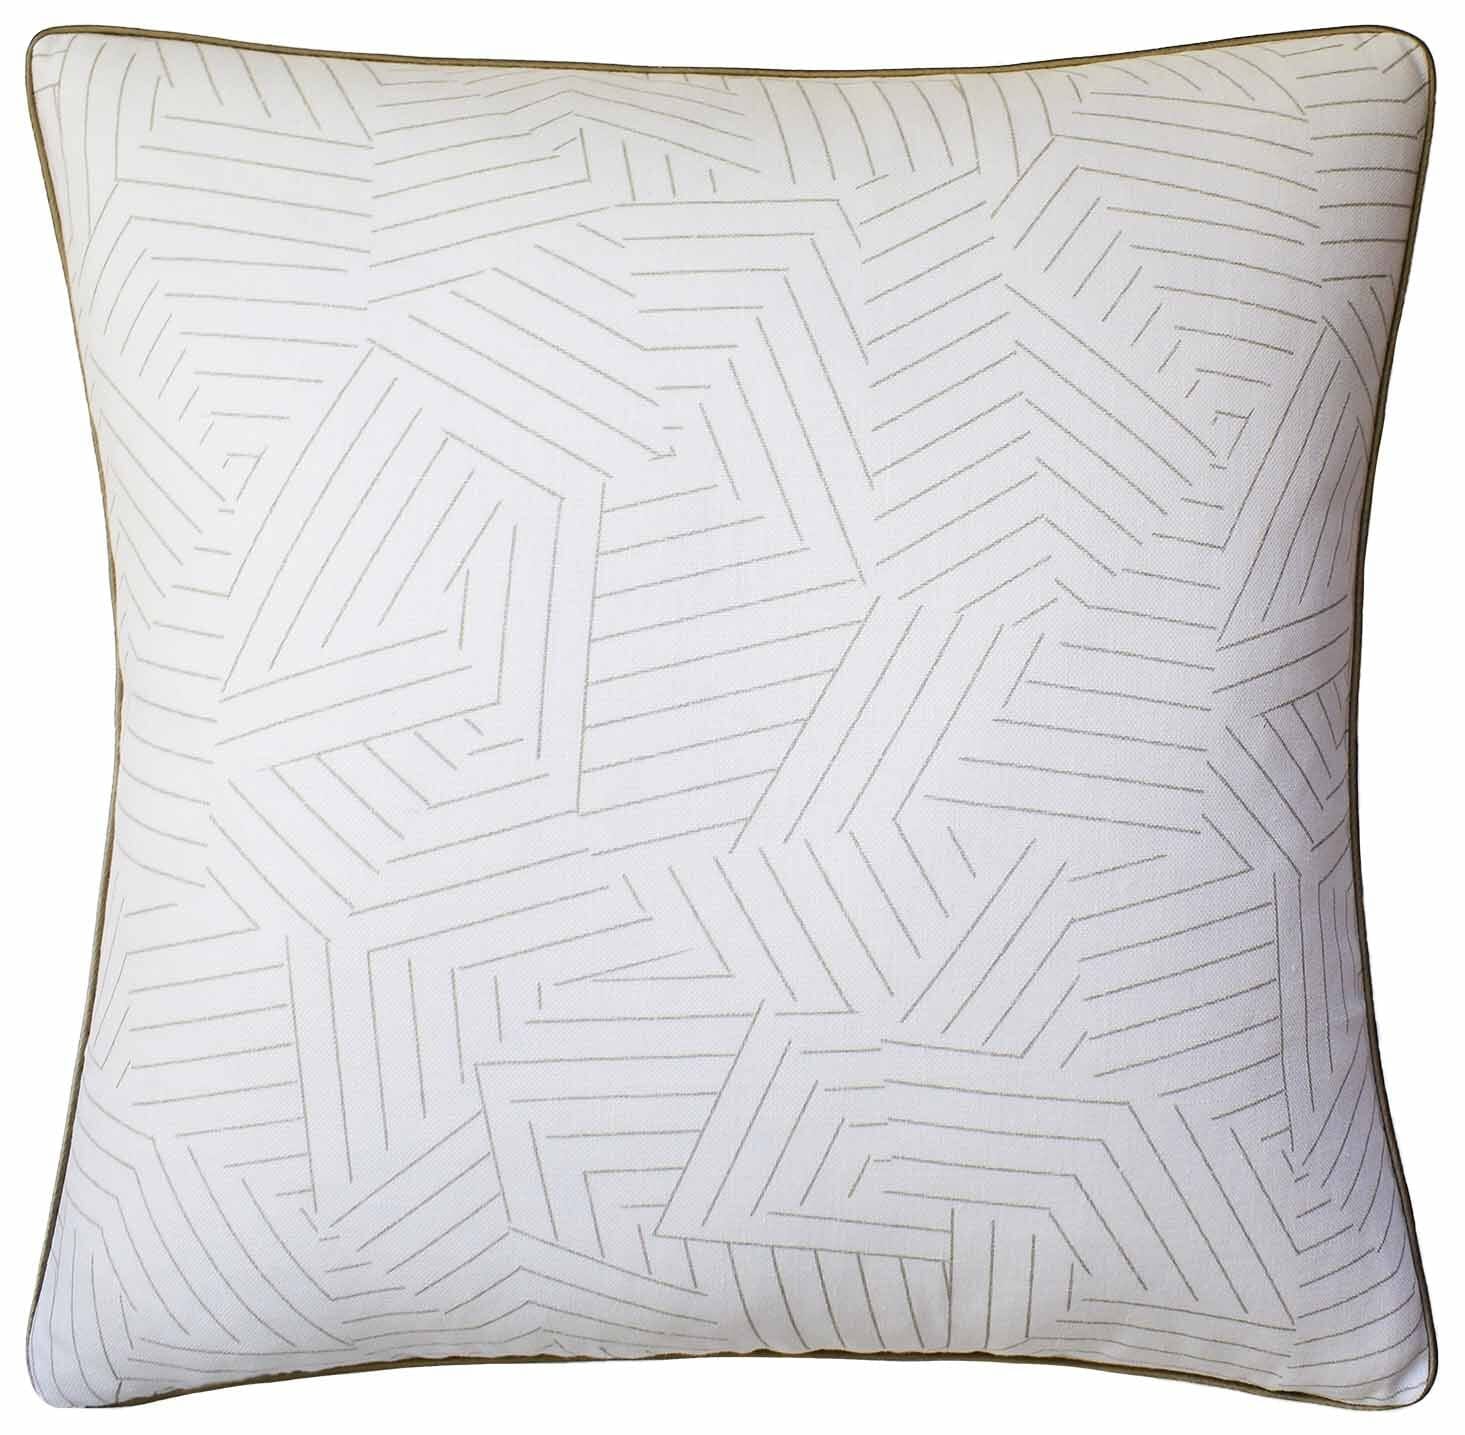 Deconstructed Stripe Greige - Throw Pillow by Ryan Studio made from Schumacher Fabric